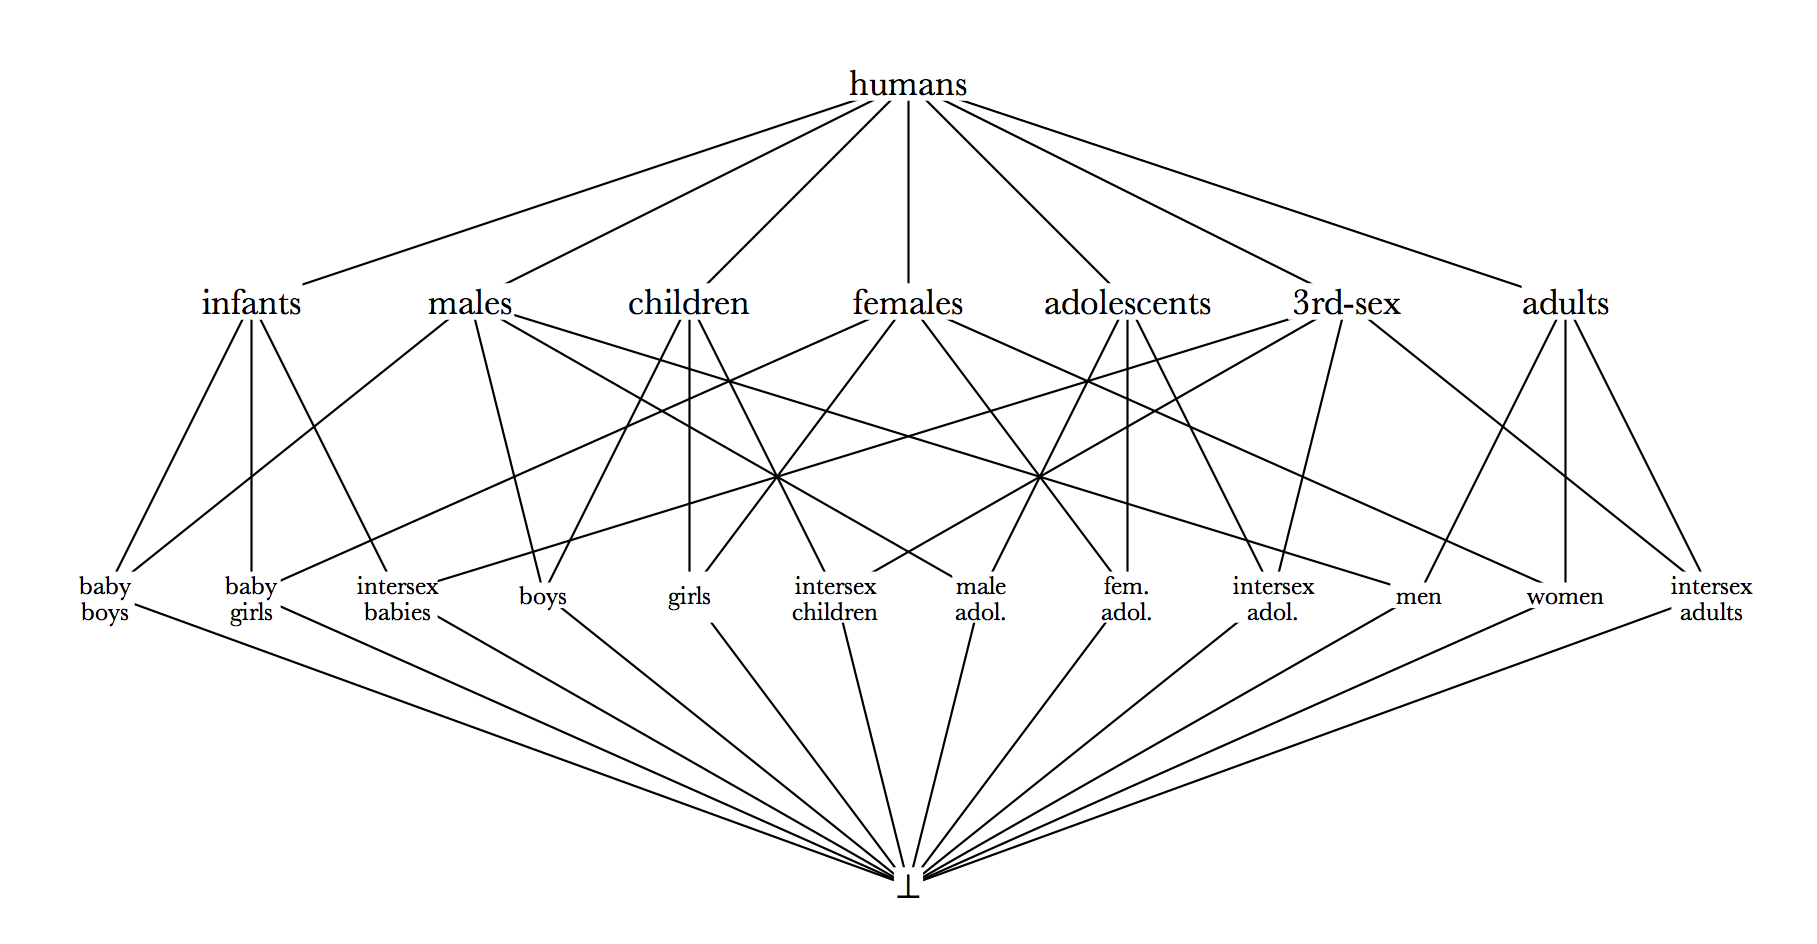 A diagram showing a lattice with all specific identity categories (e.g. humans, infants, males, children, etc.) and all of their possible combinations (e.g. infant females, intersex adults, etc.).